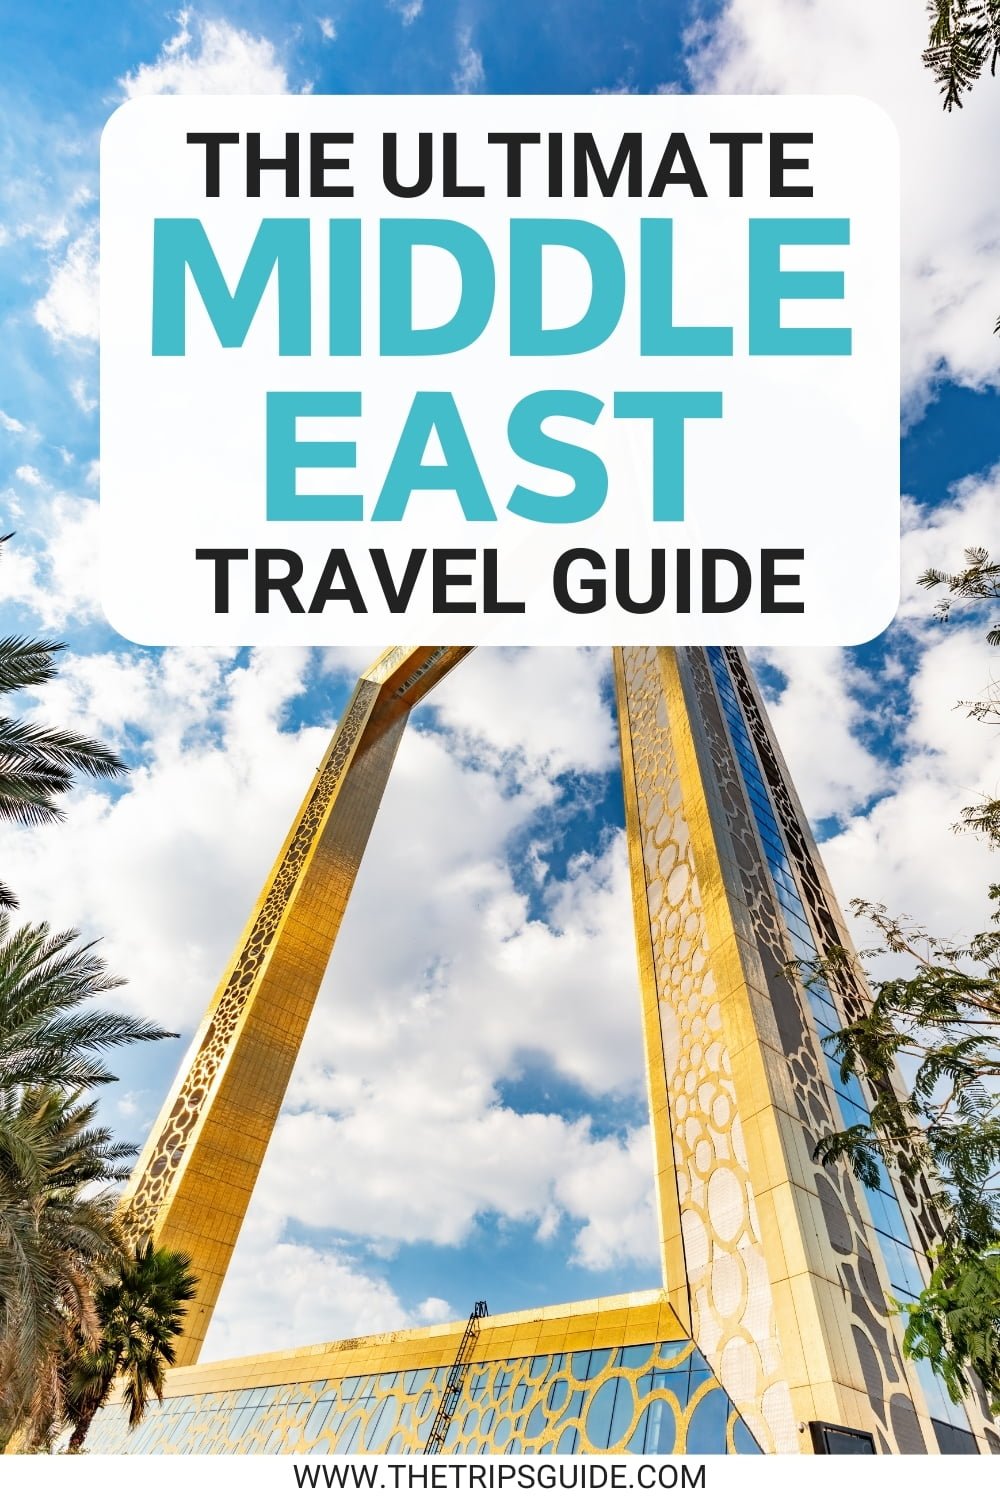 Middle East travel guide